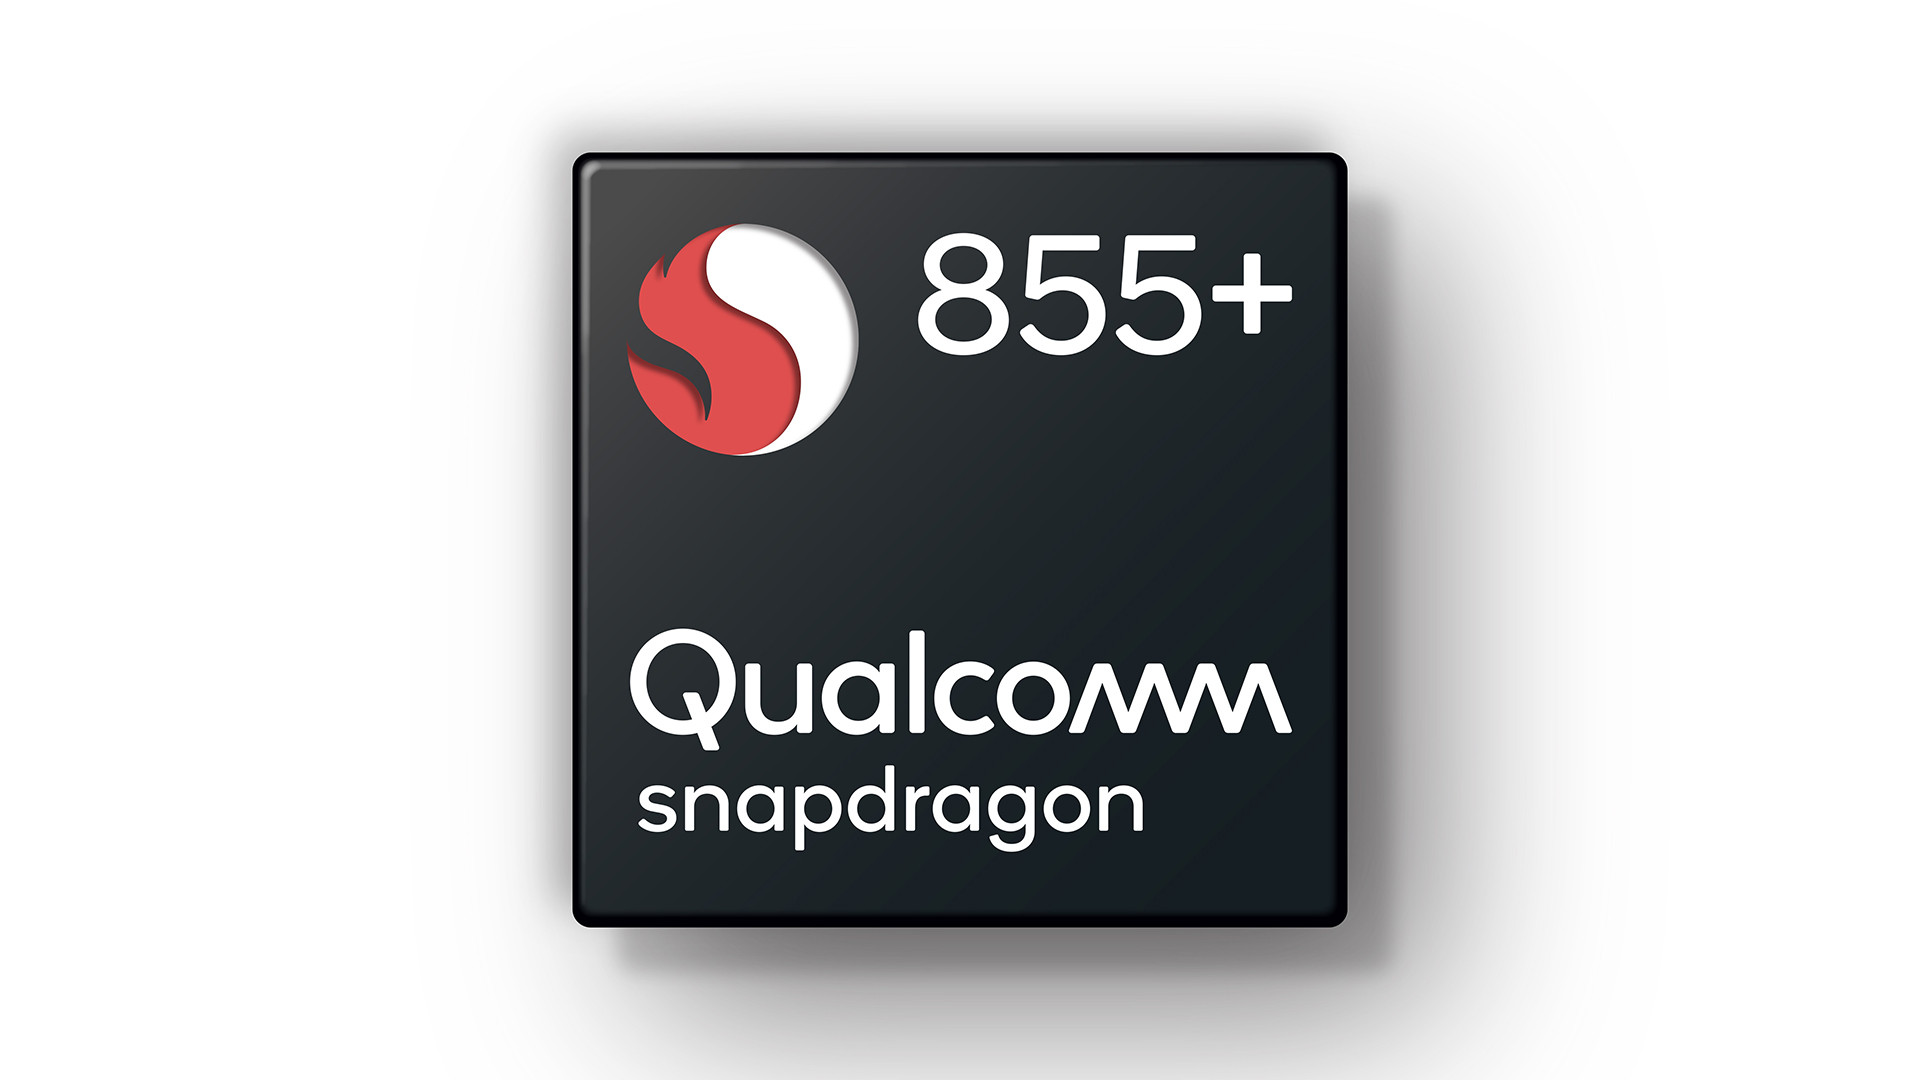 Qualcomm Snapdragon 855 Plus announced - Android Authority